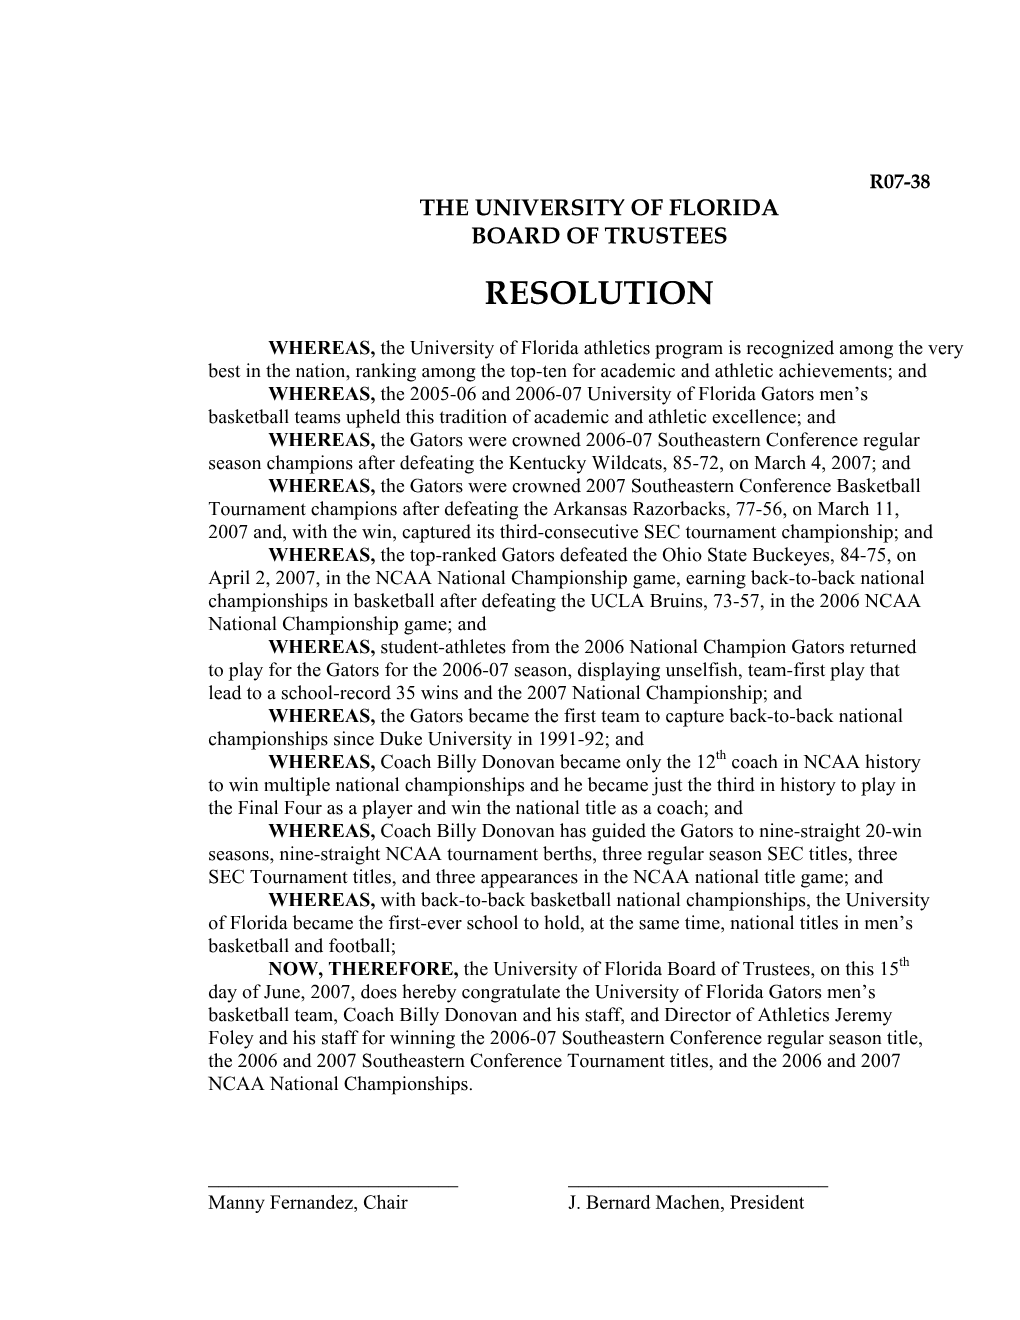 R07-38 the University of Florida Board of Trustees